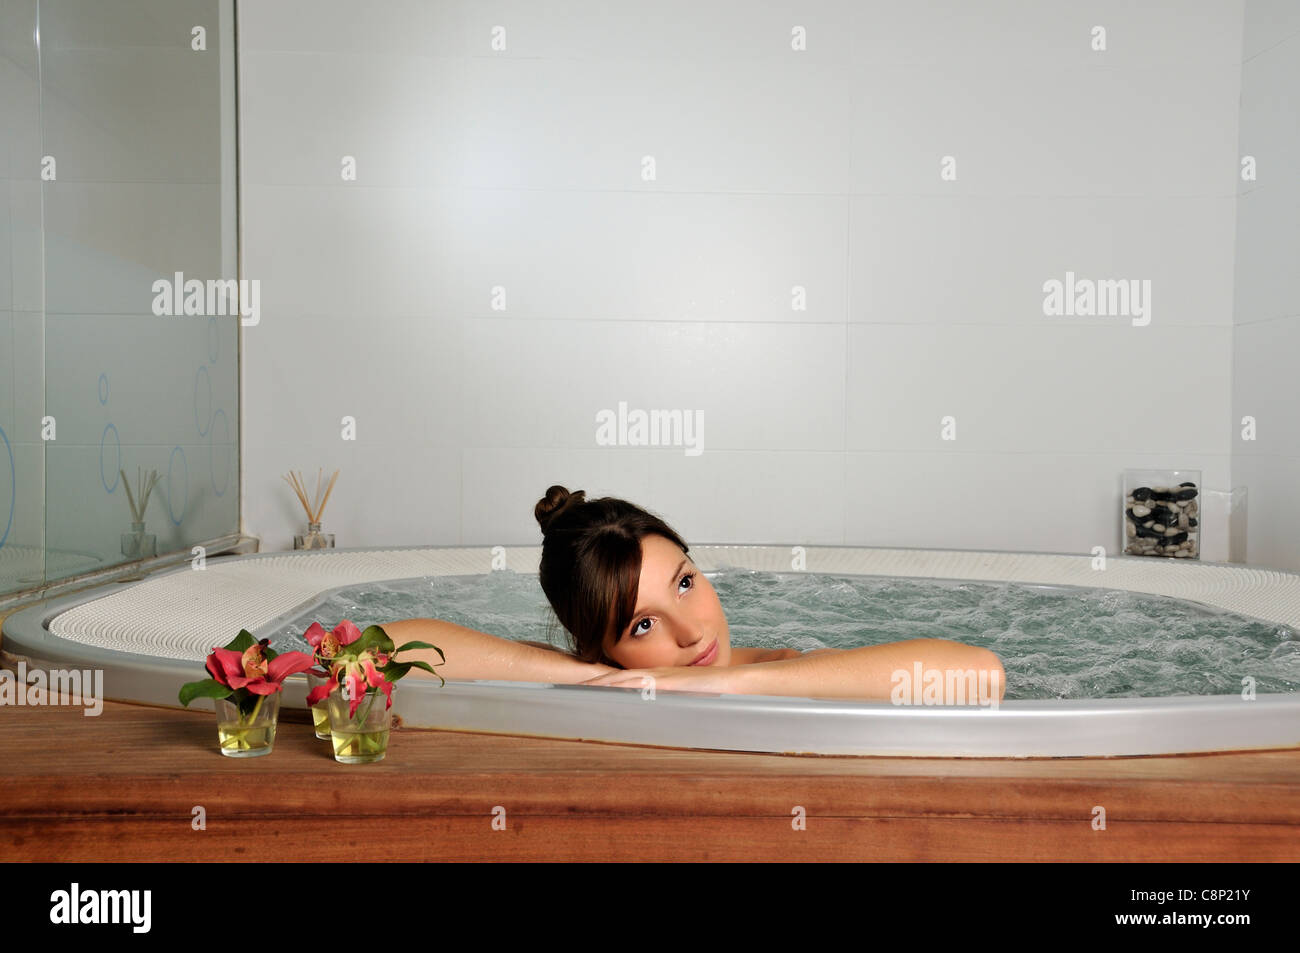 Woman relaxing in jacuzzi Stock Photo